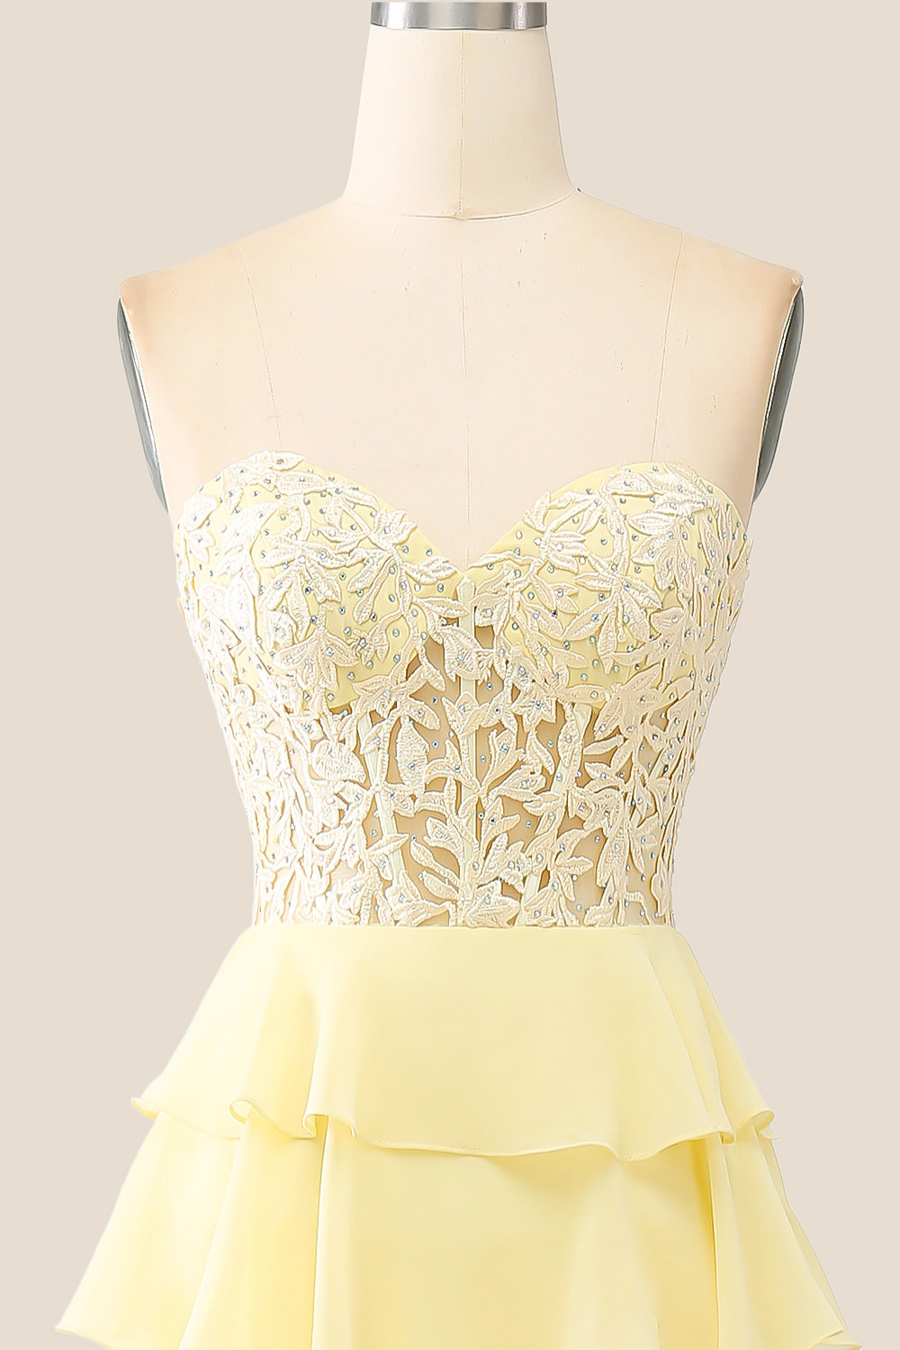 Sweetheart Yellow Appliques Tiered Ruffles Dress